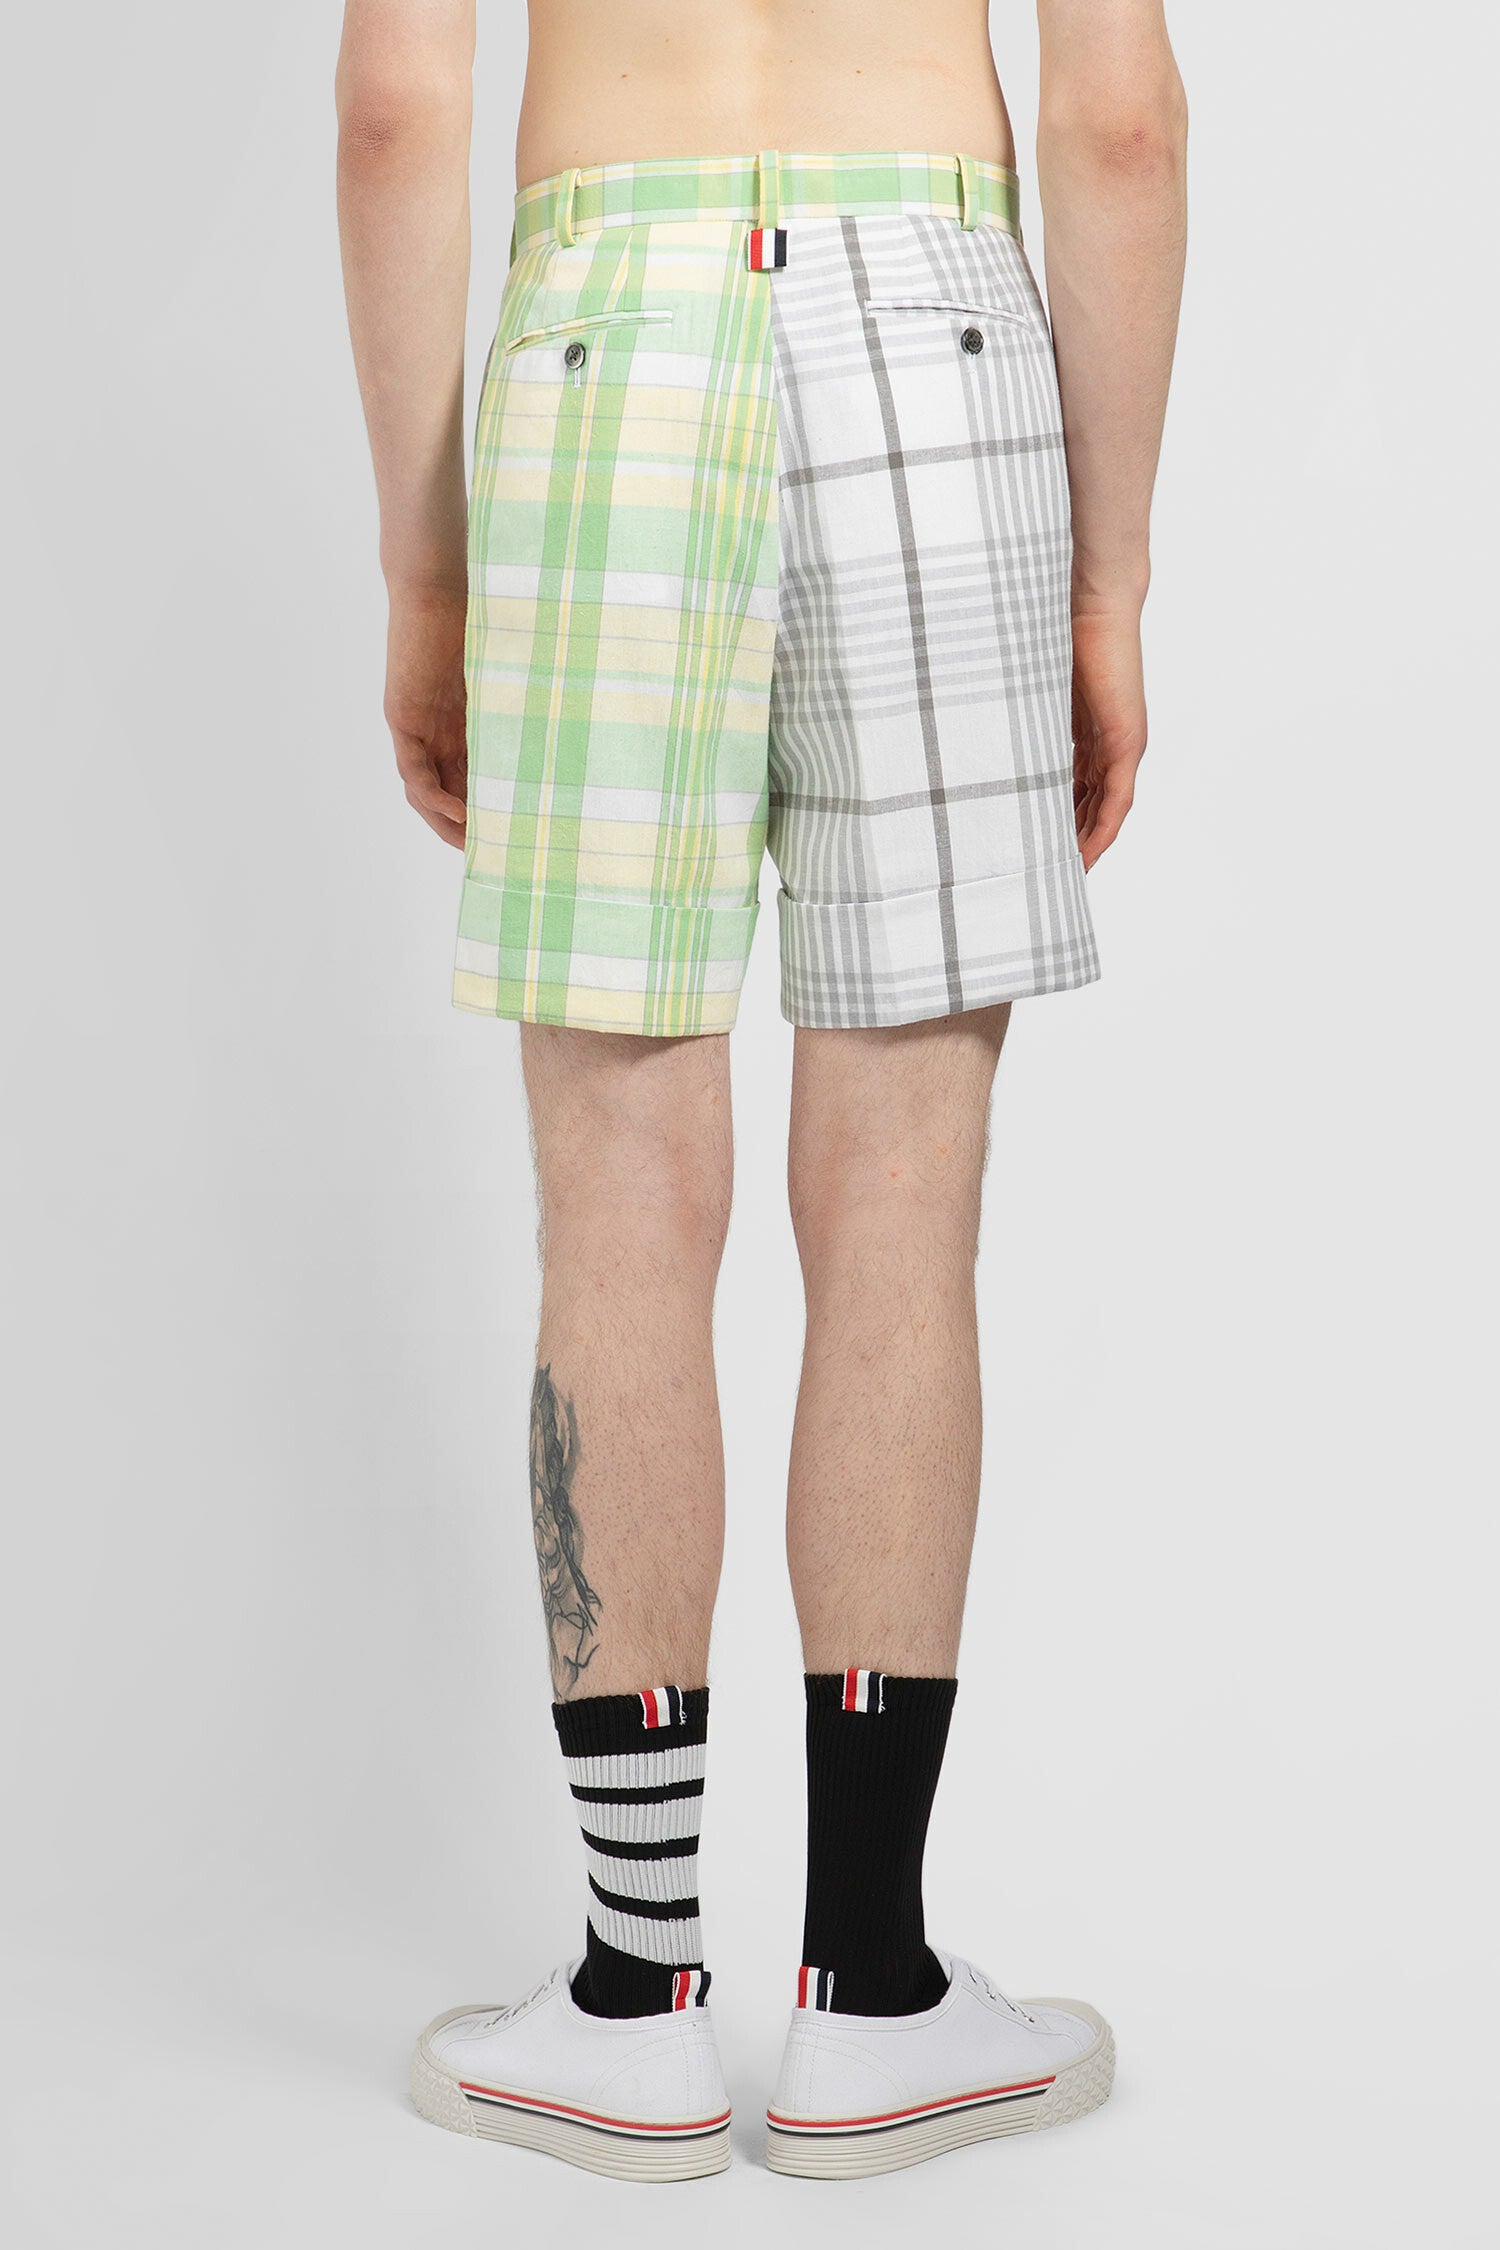 THOM BROWNE MAN MULTICOLOR SHORTS & SKIRTS